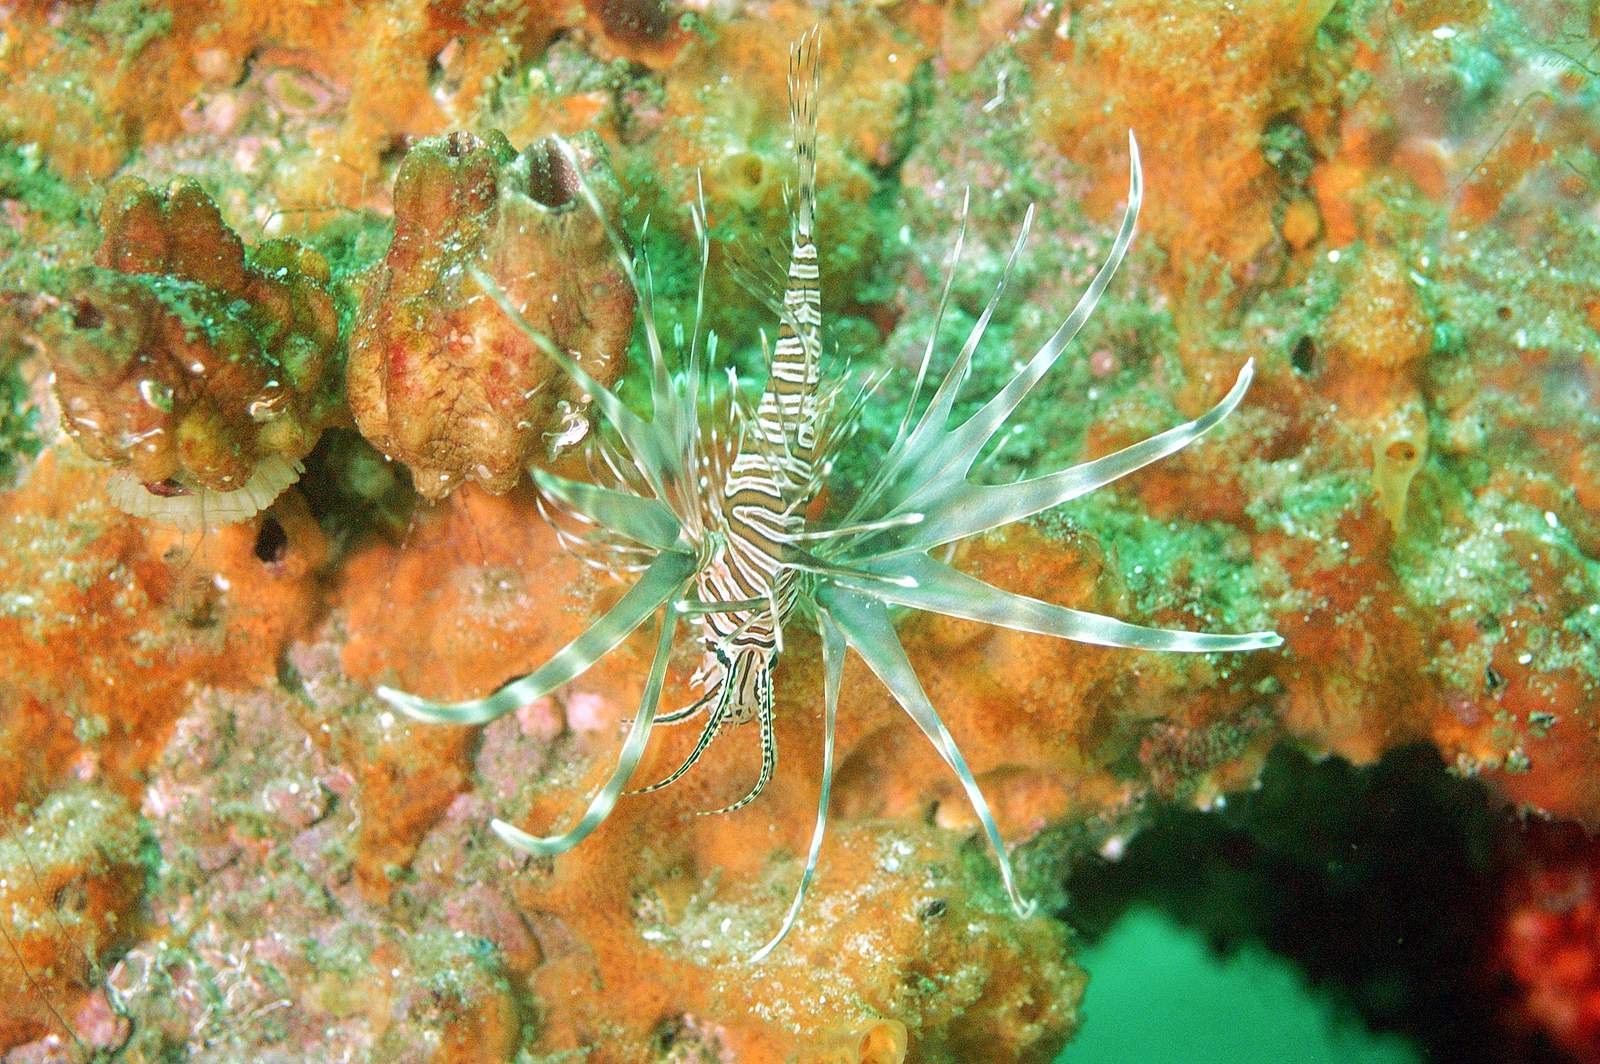 FWC inviting divers and vendors to Lionfish removal event